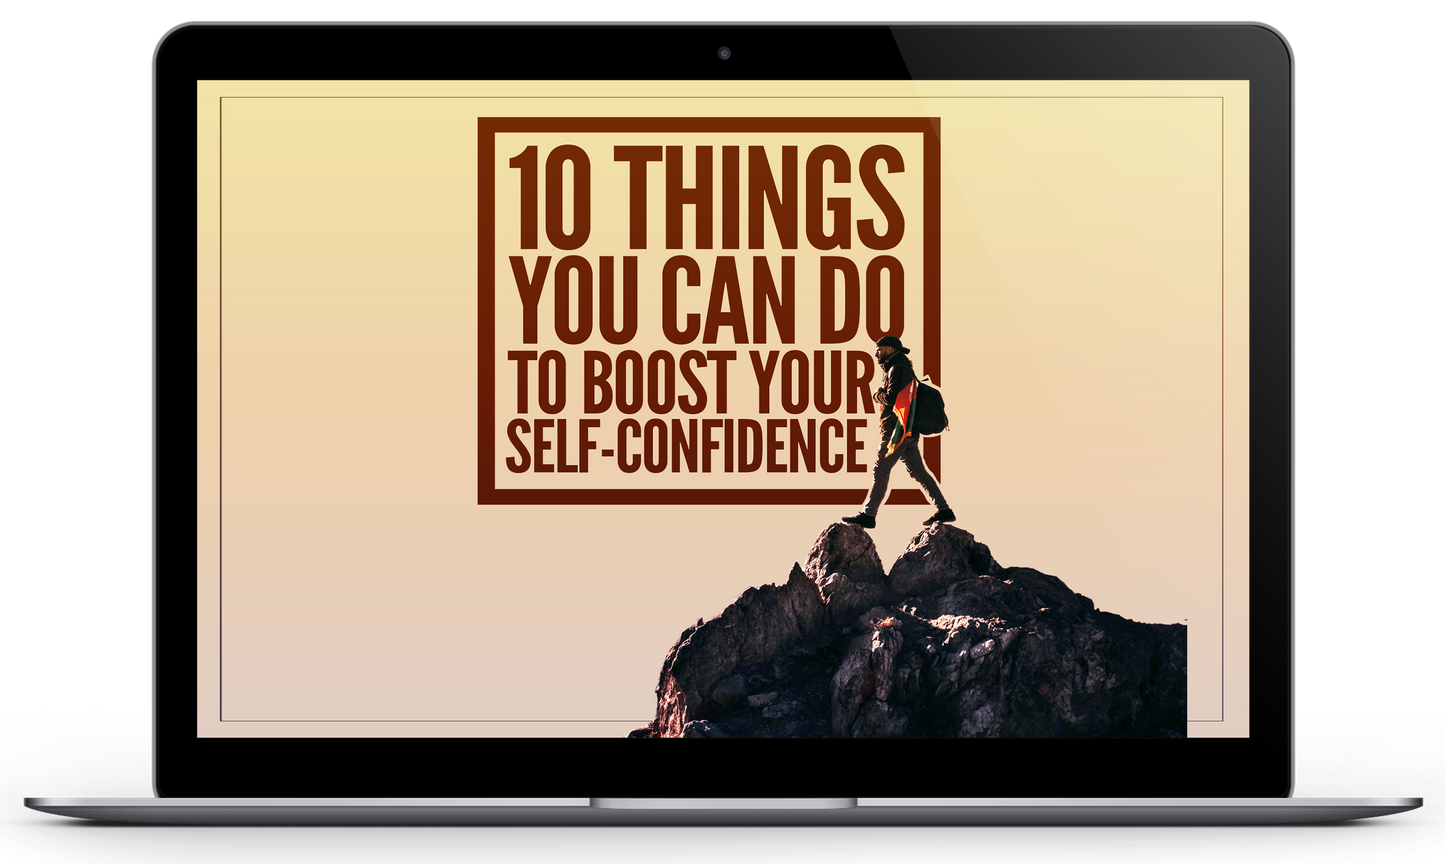 10 Things You Can Do To Boost Your Self-Confidence